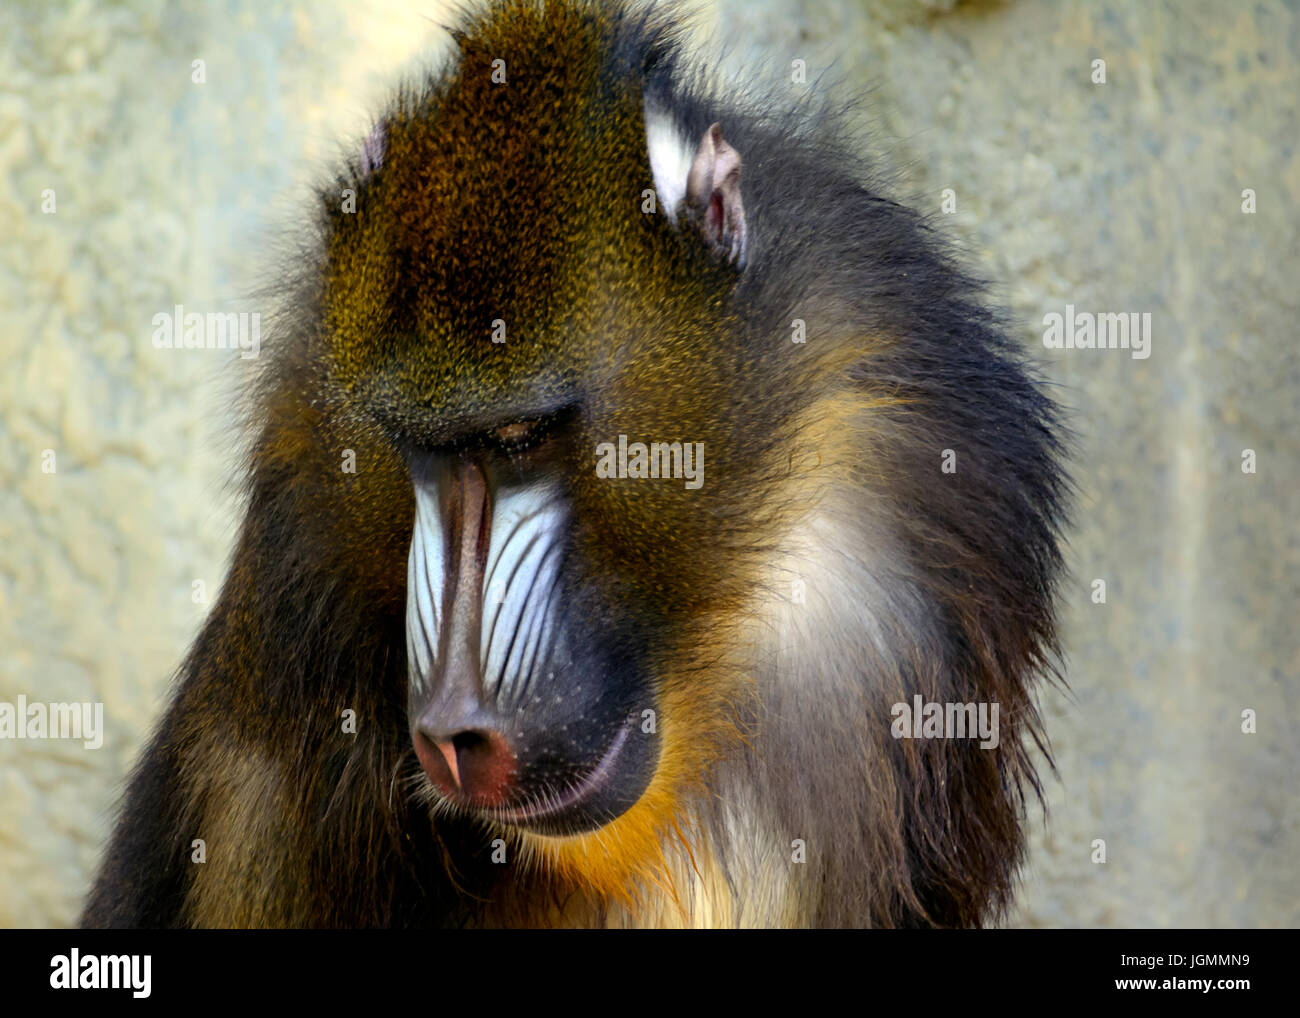 Mandrill (Mandrillus sphinx) Primate close-up, looking down with sad expression Stock Photo